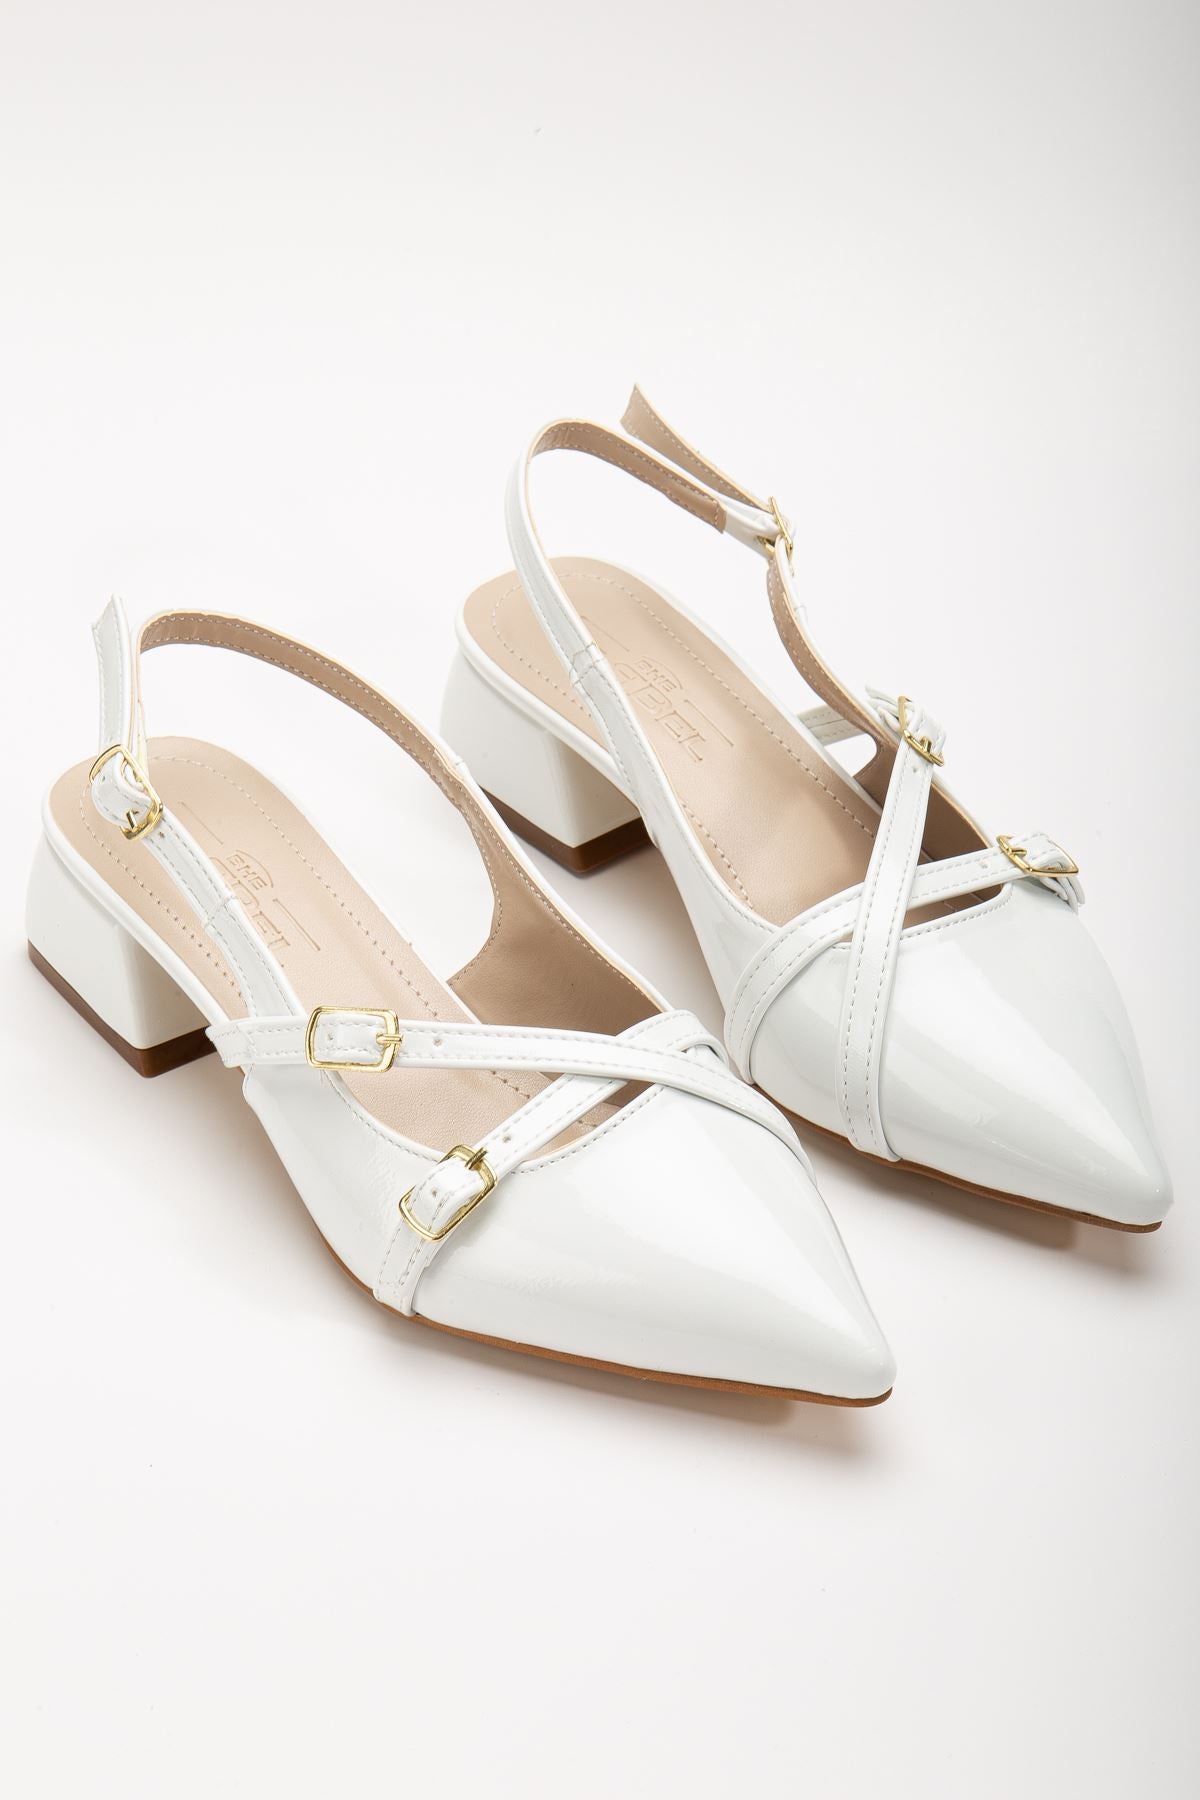 Pary White Patent Leather Women's Heeled Shoes - STREETMODE™